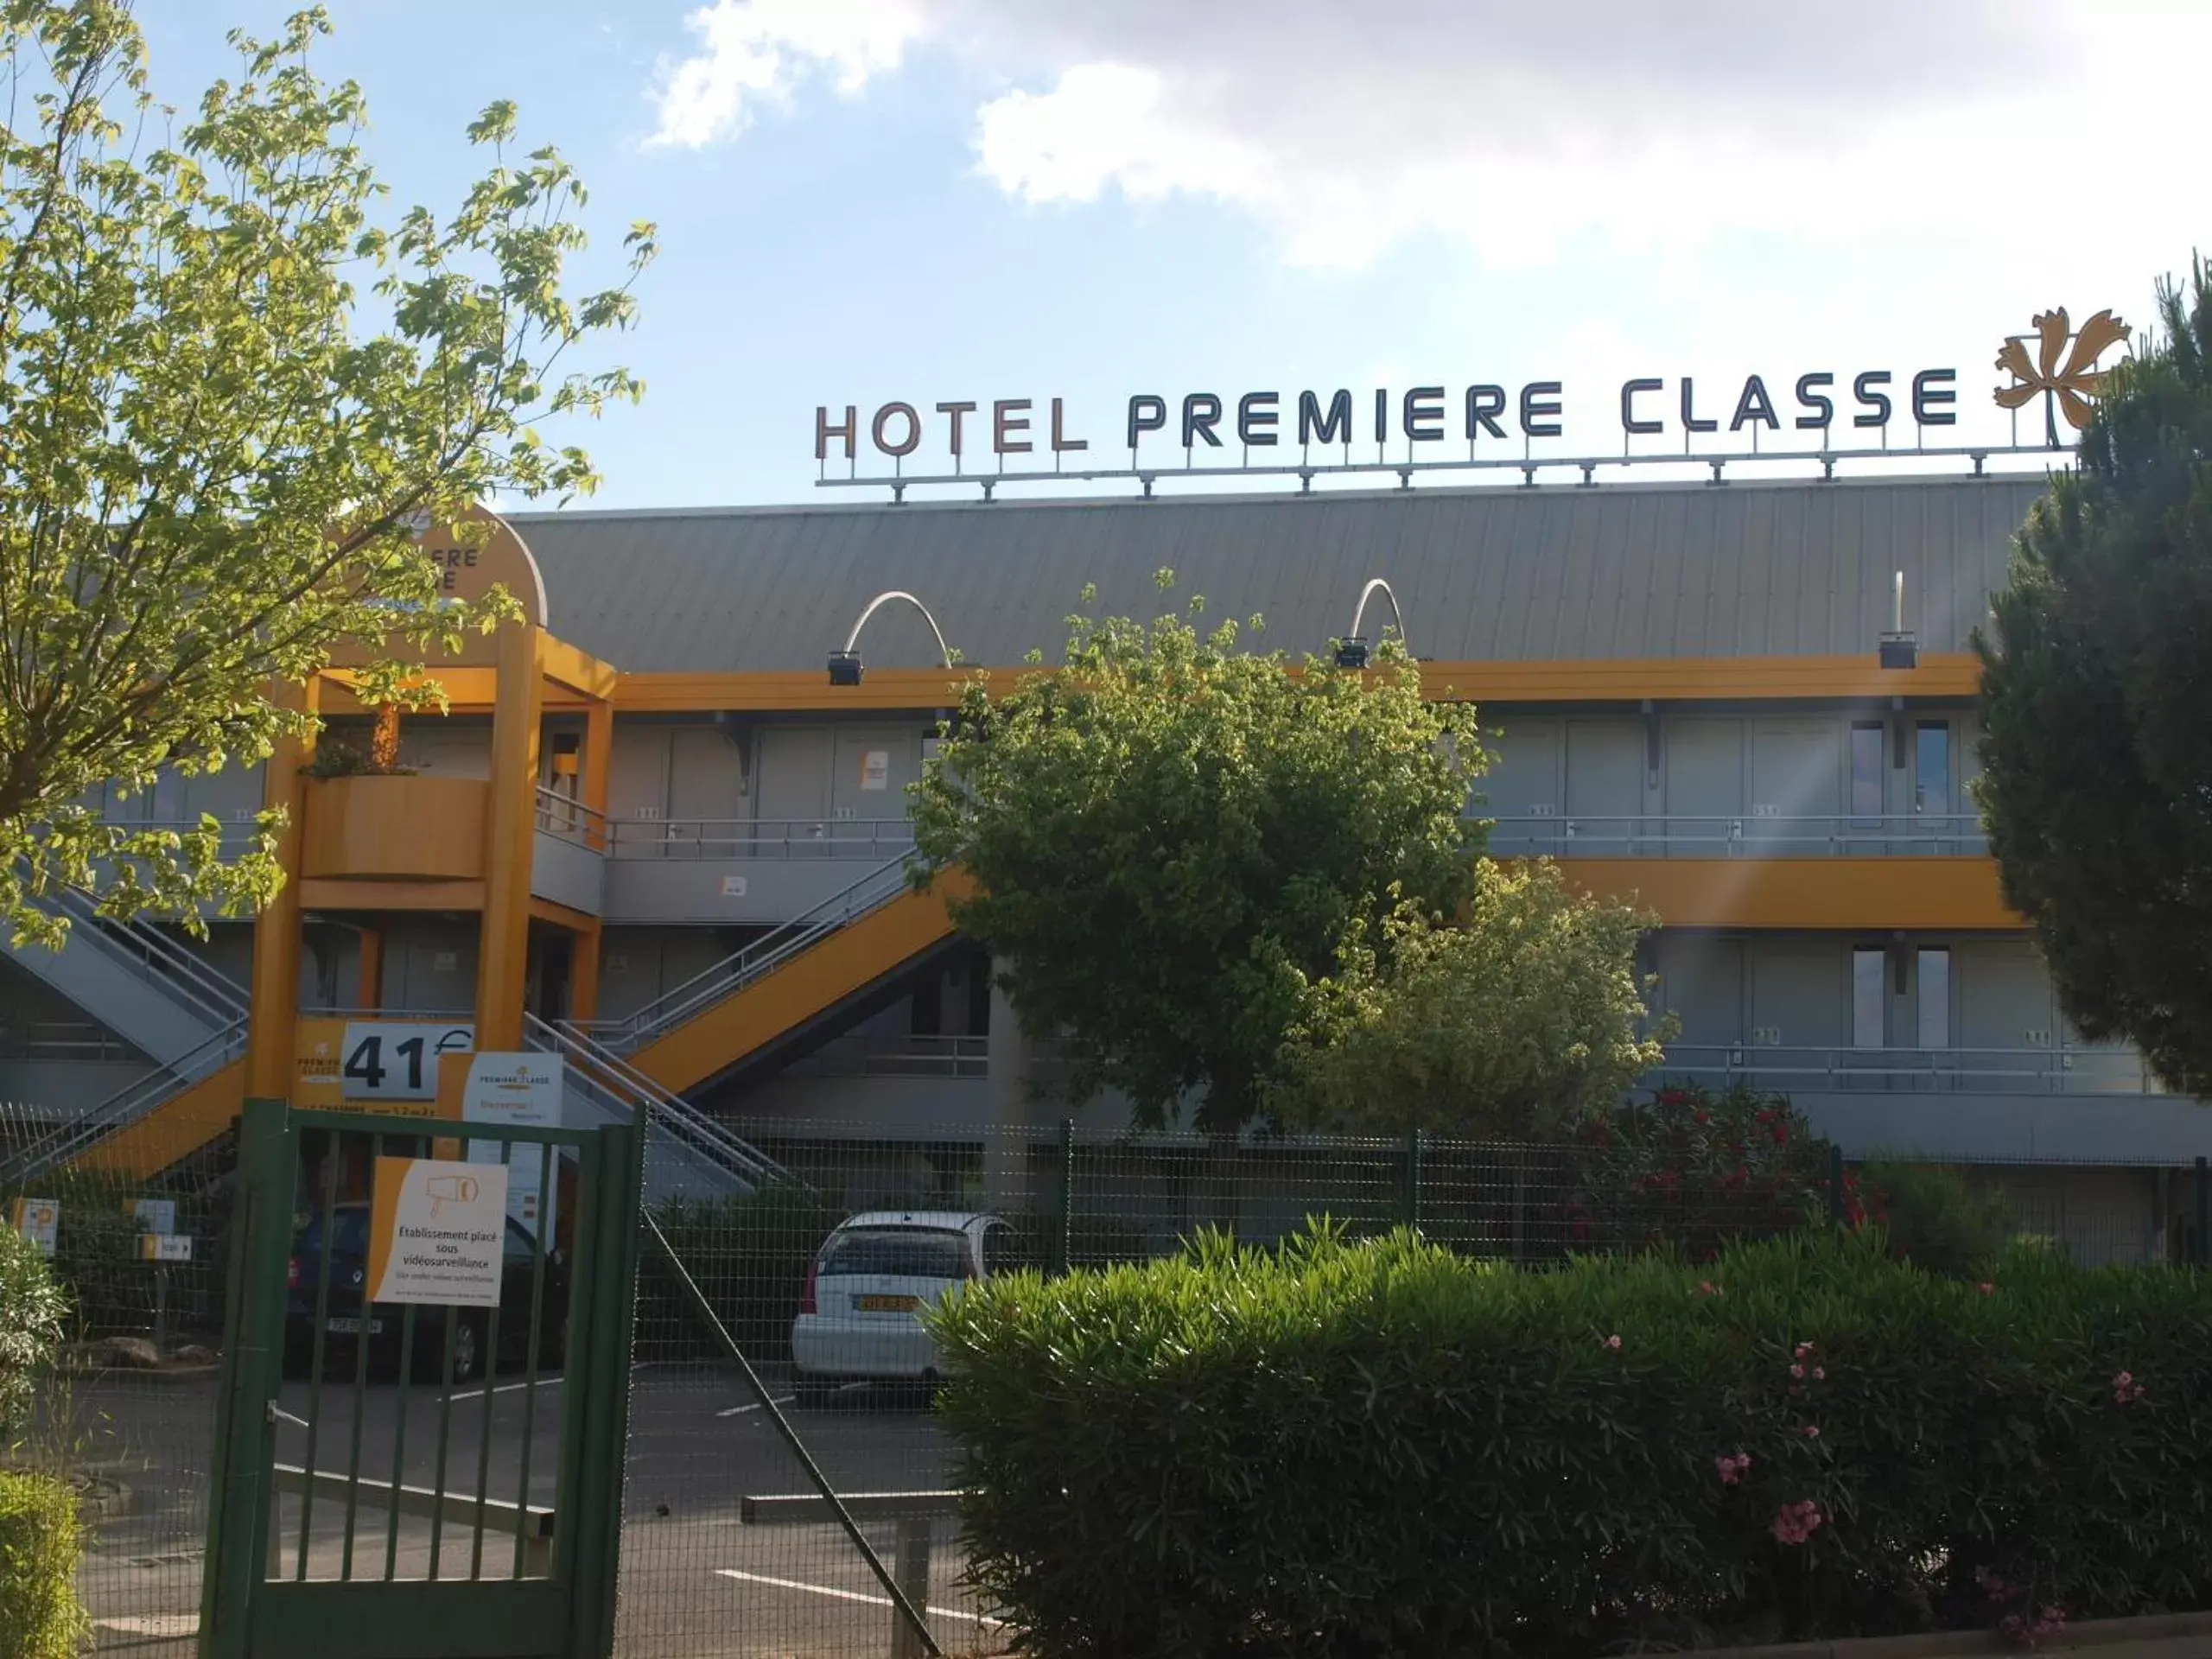 Property logo or sign, Property Building in Premiere Classe Beziers